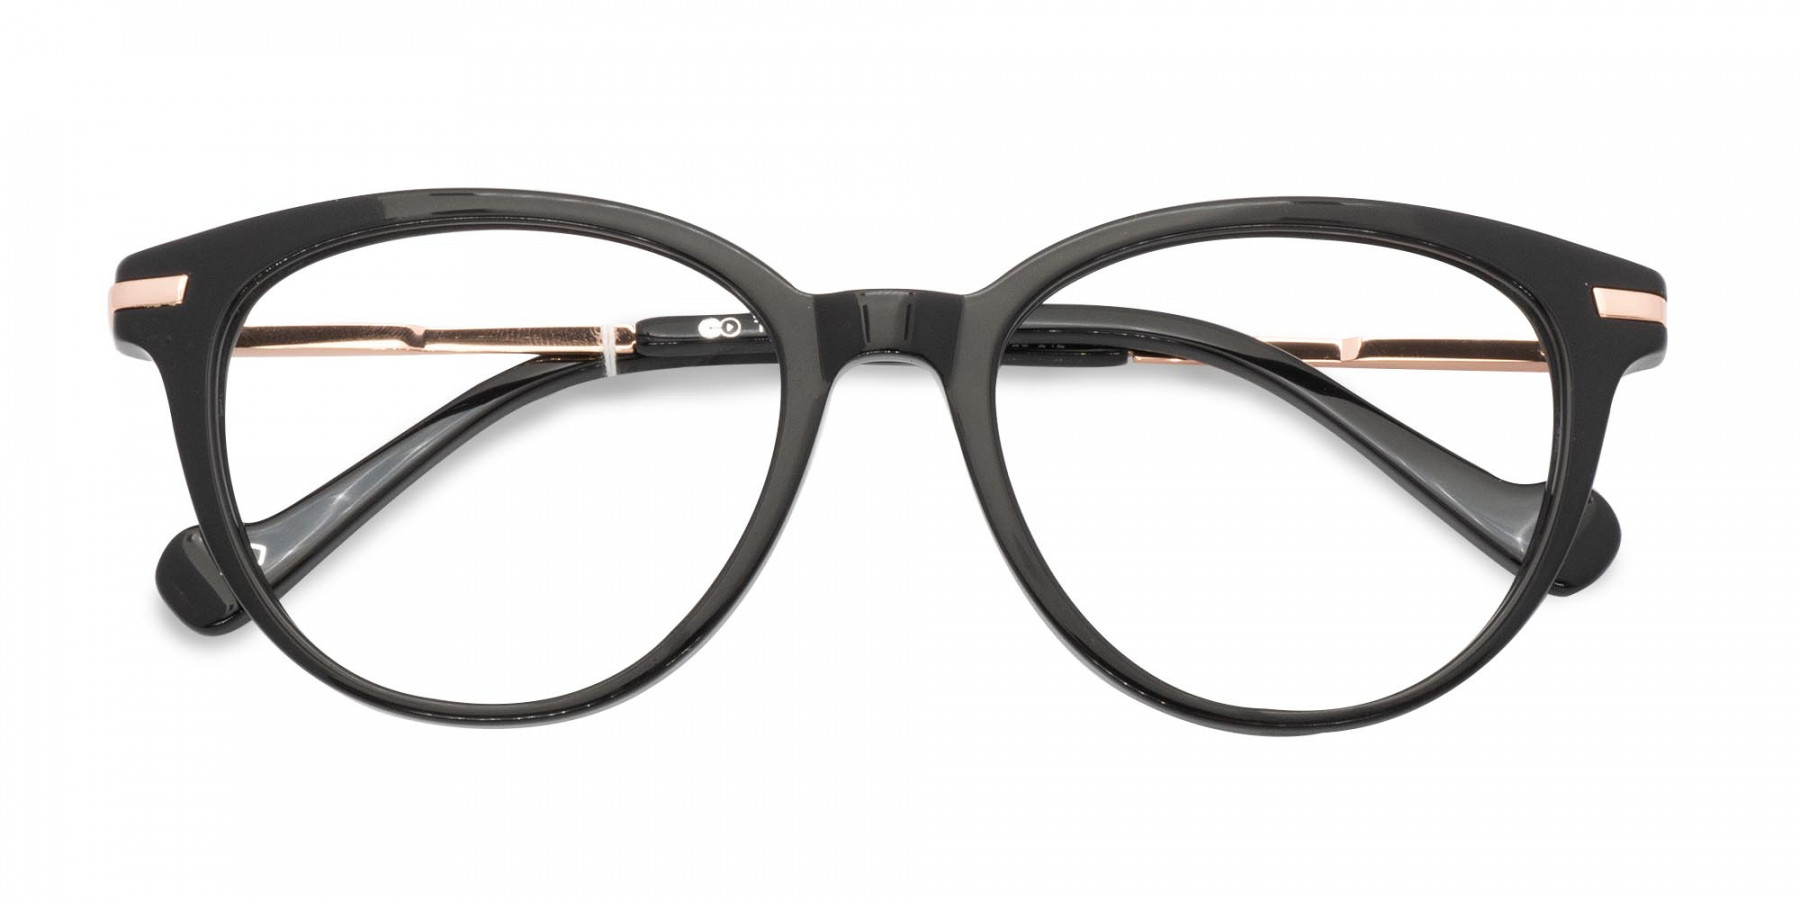 Hawley 1 Black Frame And Golden Arm Glasses Specscart®